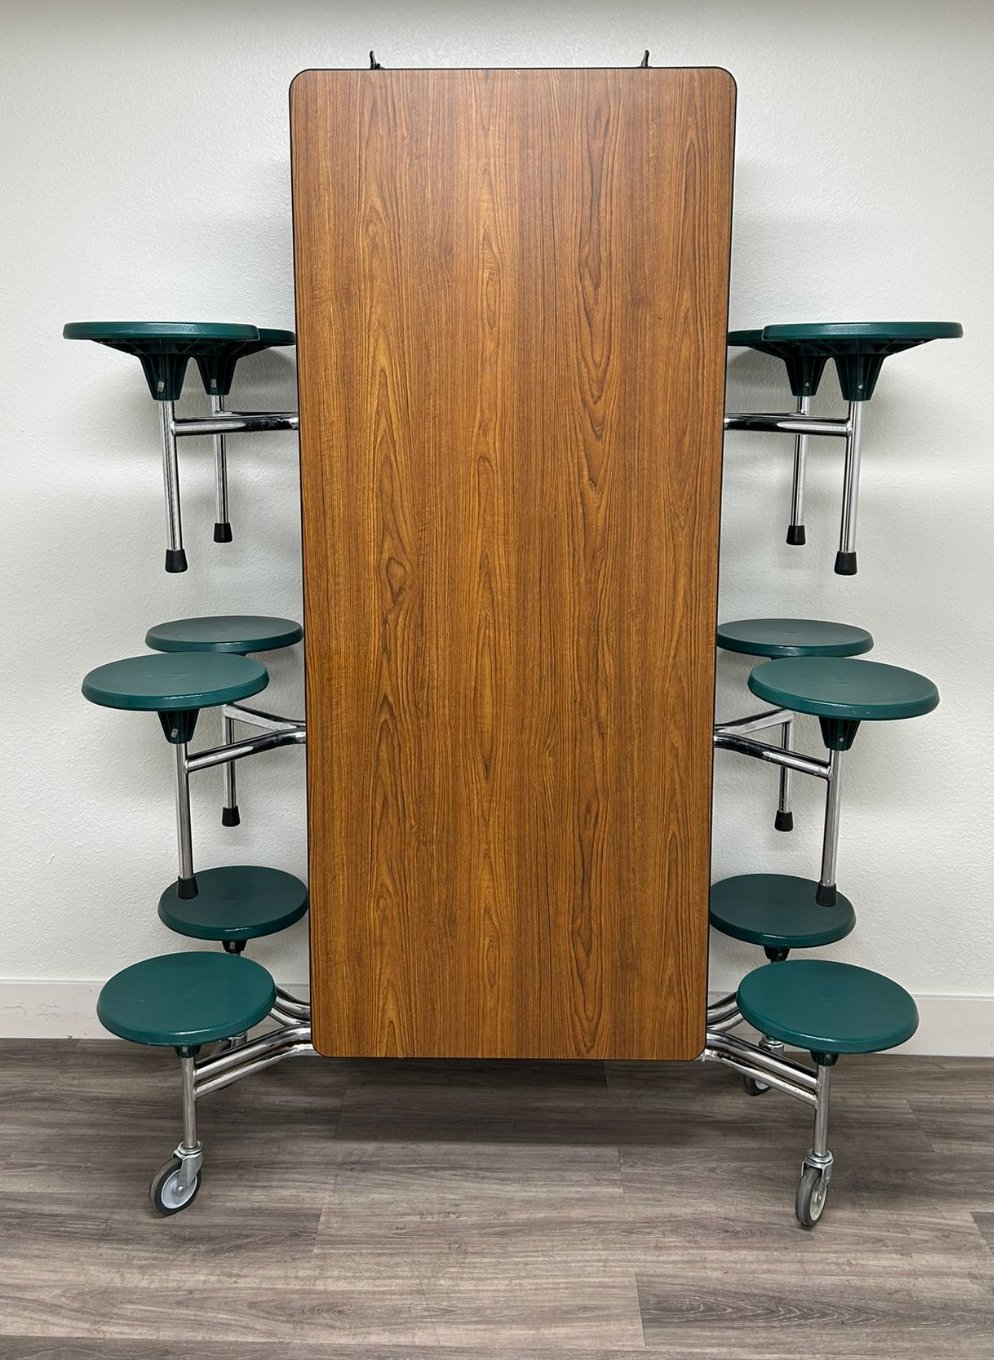 12ft Cafeteria Lunch Table w/ Stool Seat, Wood Grain Top, Green Seat, Adult Size (RF)